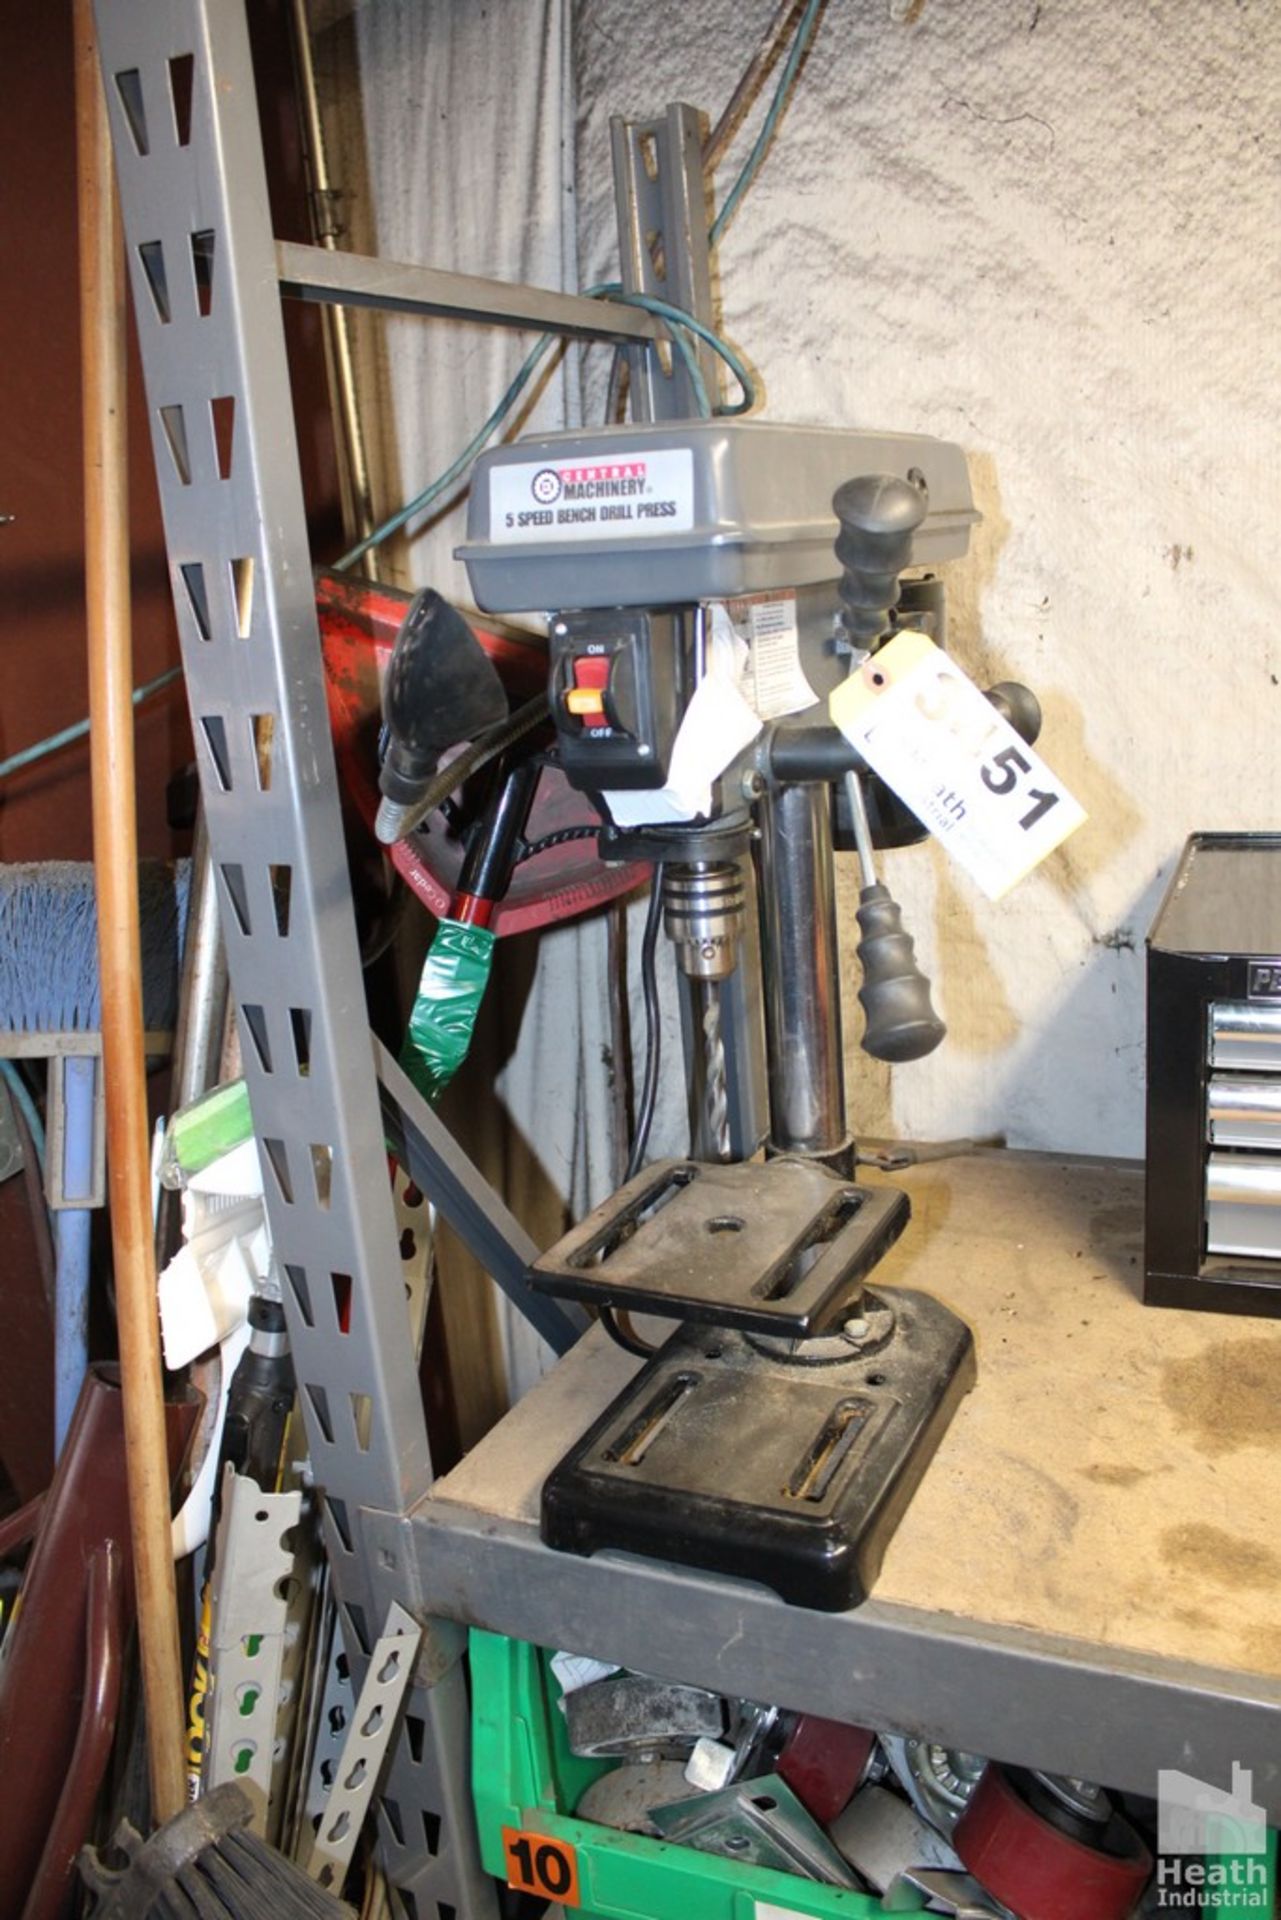 CENTRAL MACHINERY 5 SPEED BENCH TOP DRILL PRESS